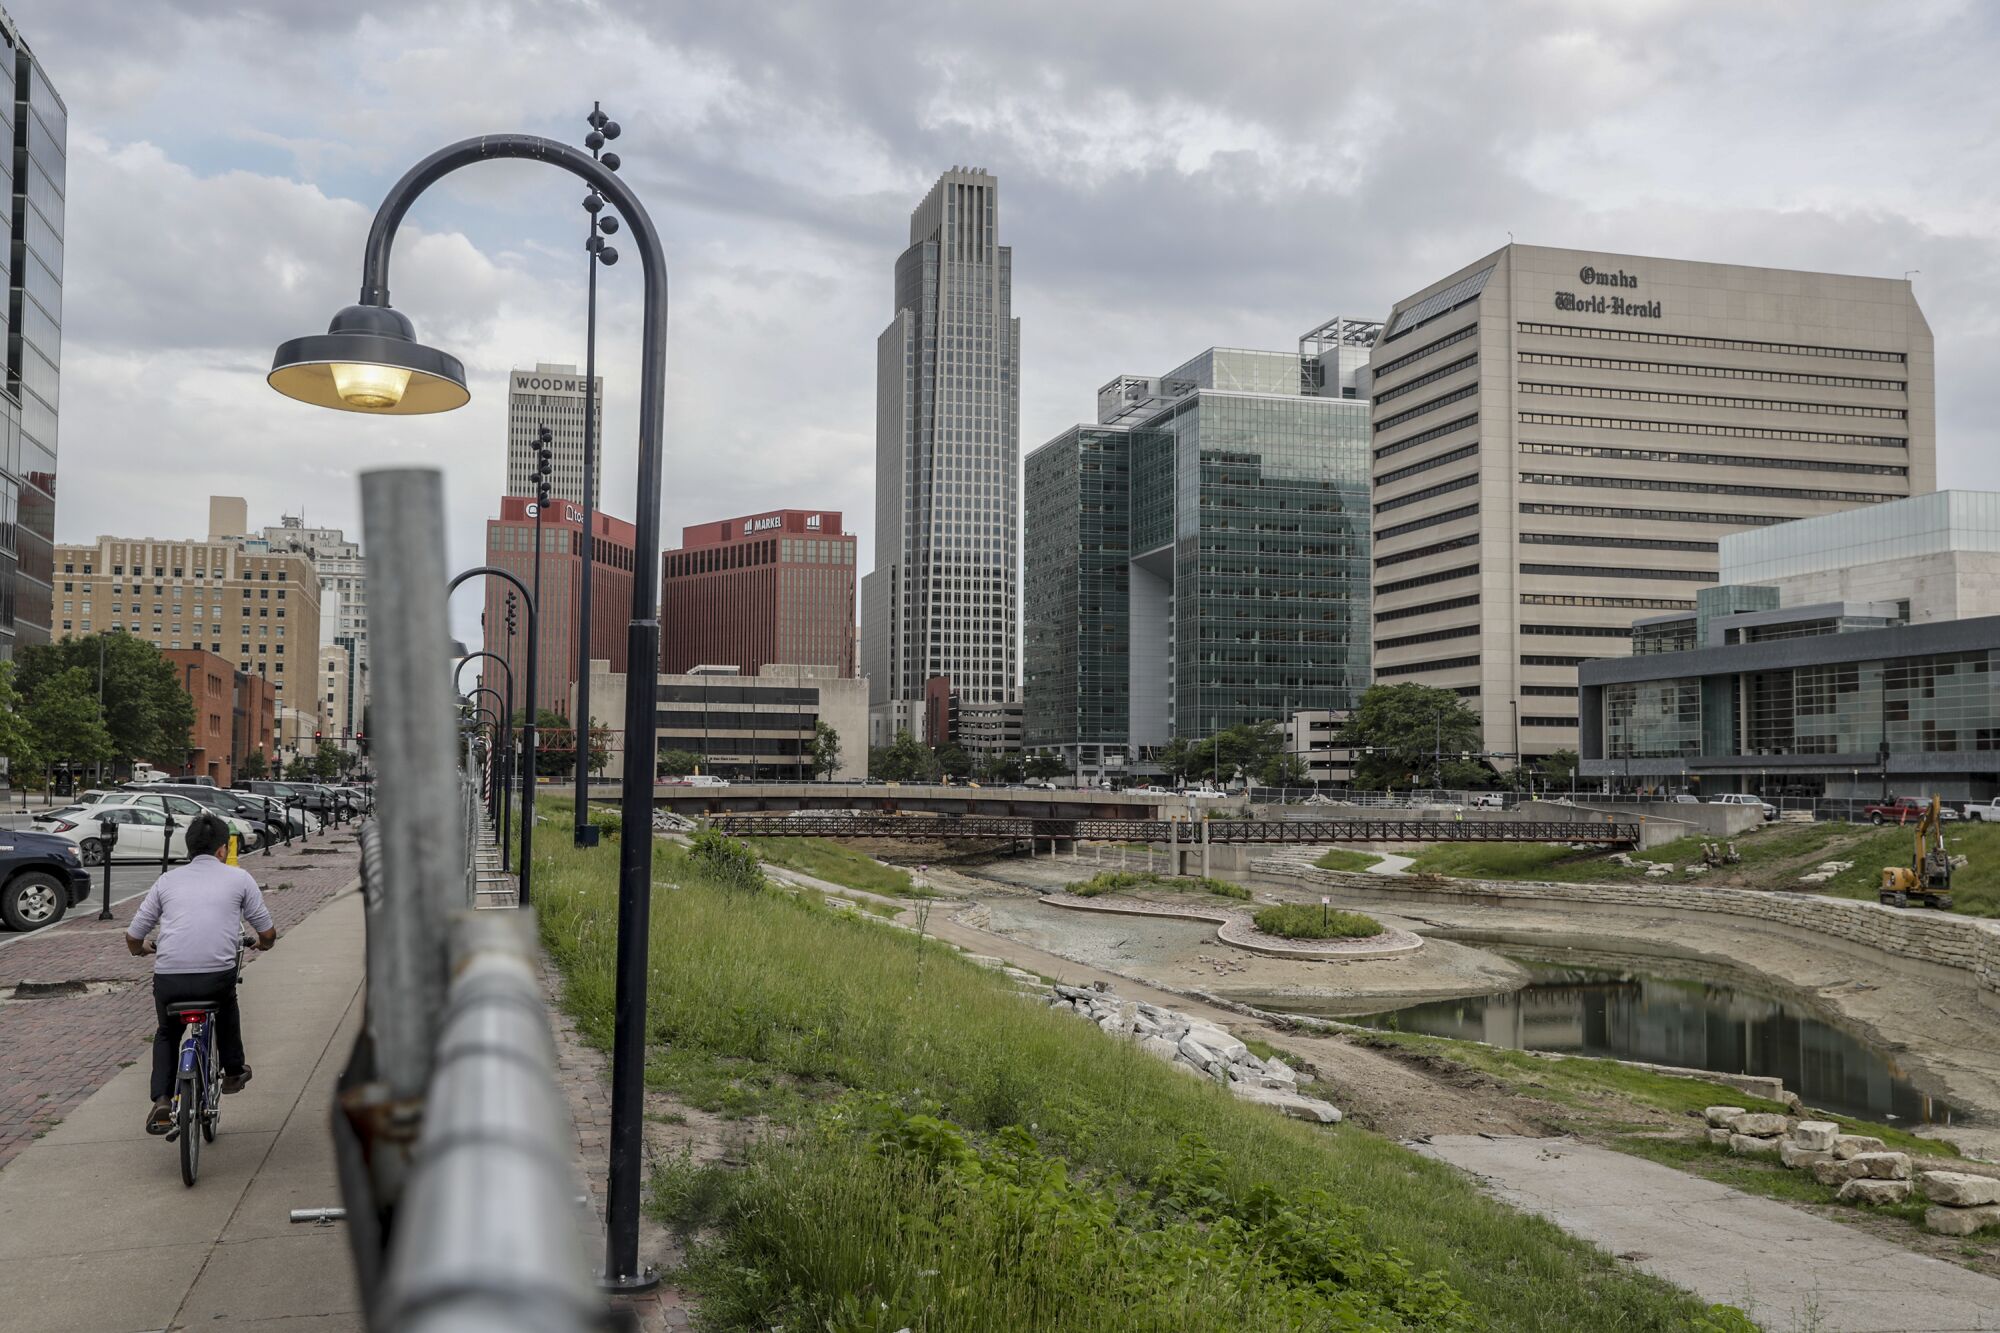 Downtown Omaha where a city center park and lagoon known as Gene Leahy Mall is under reconstruction. 